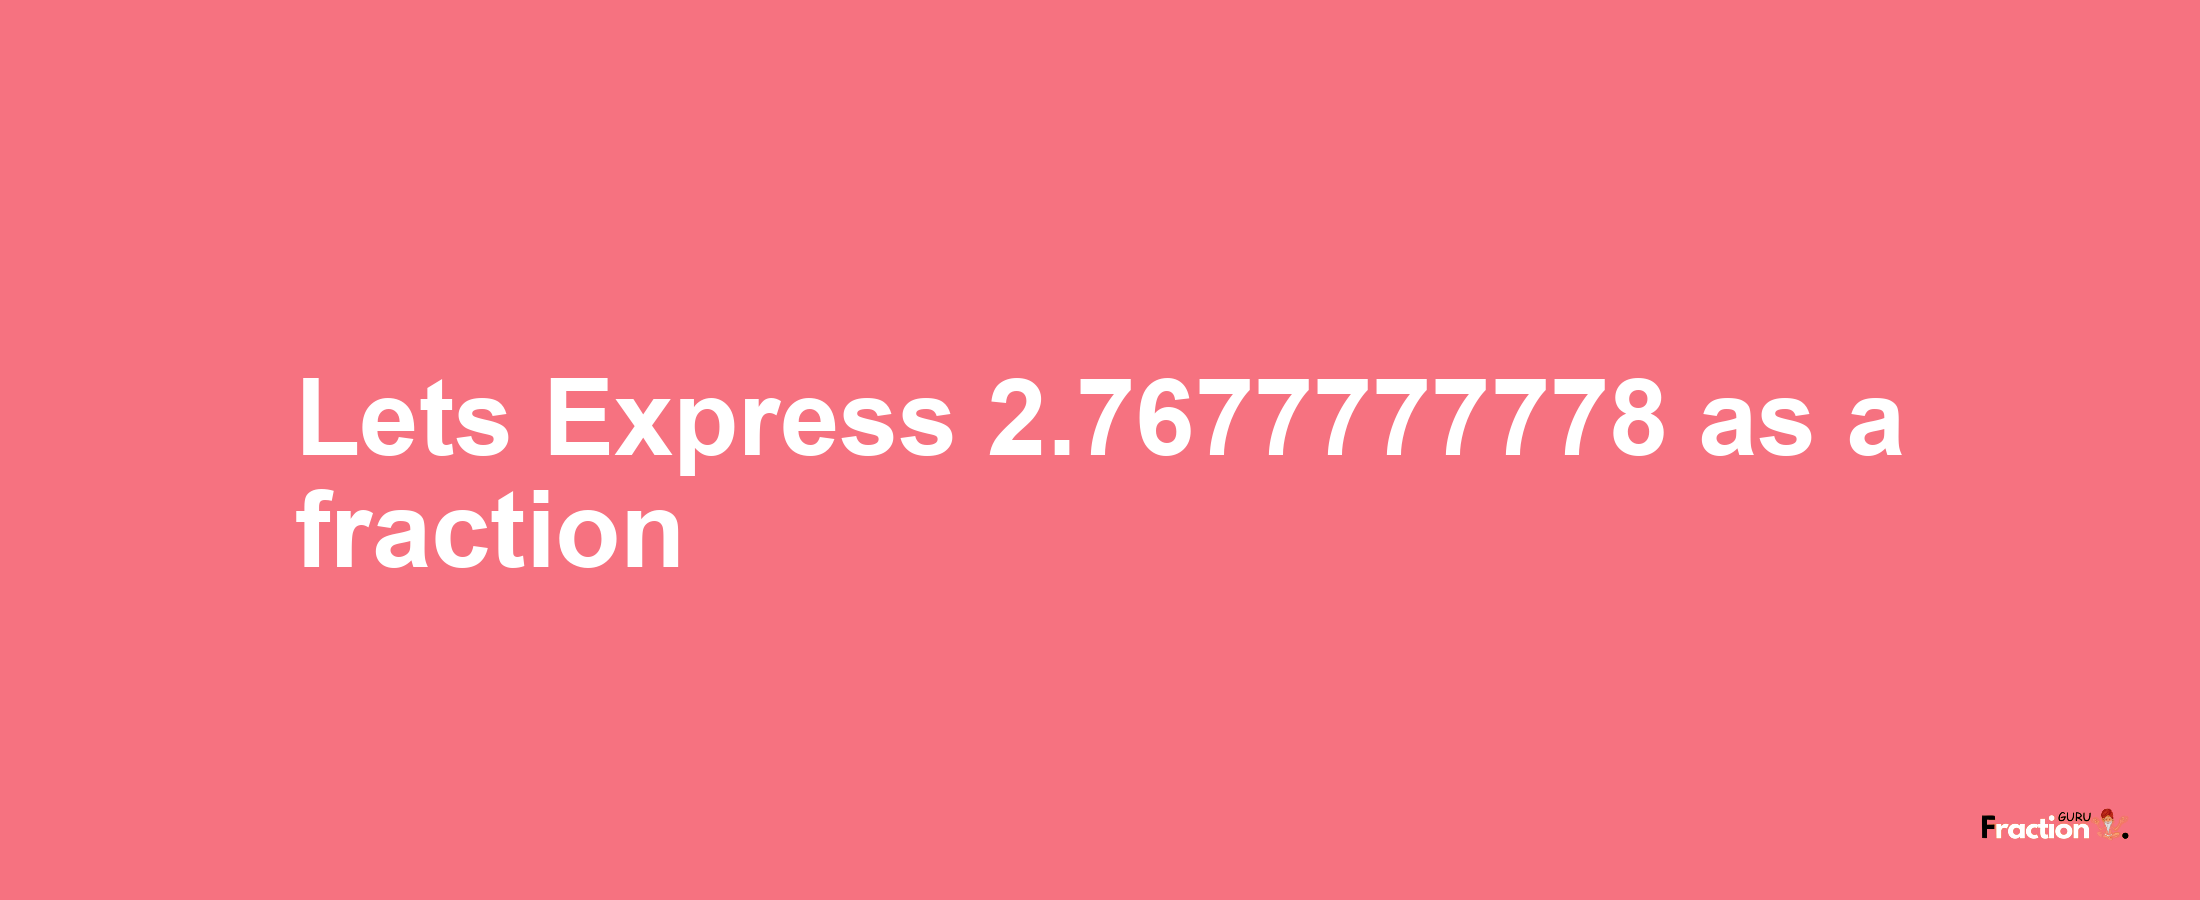 Lets Express 2.7677777778 as afraction